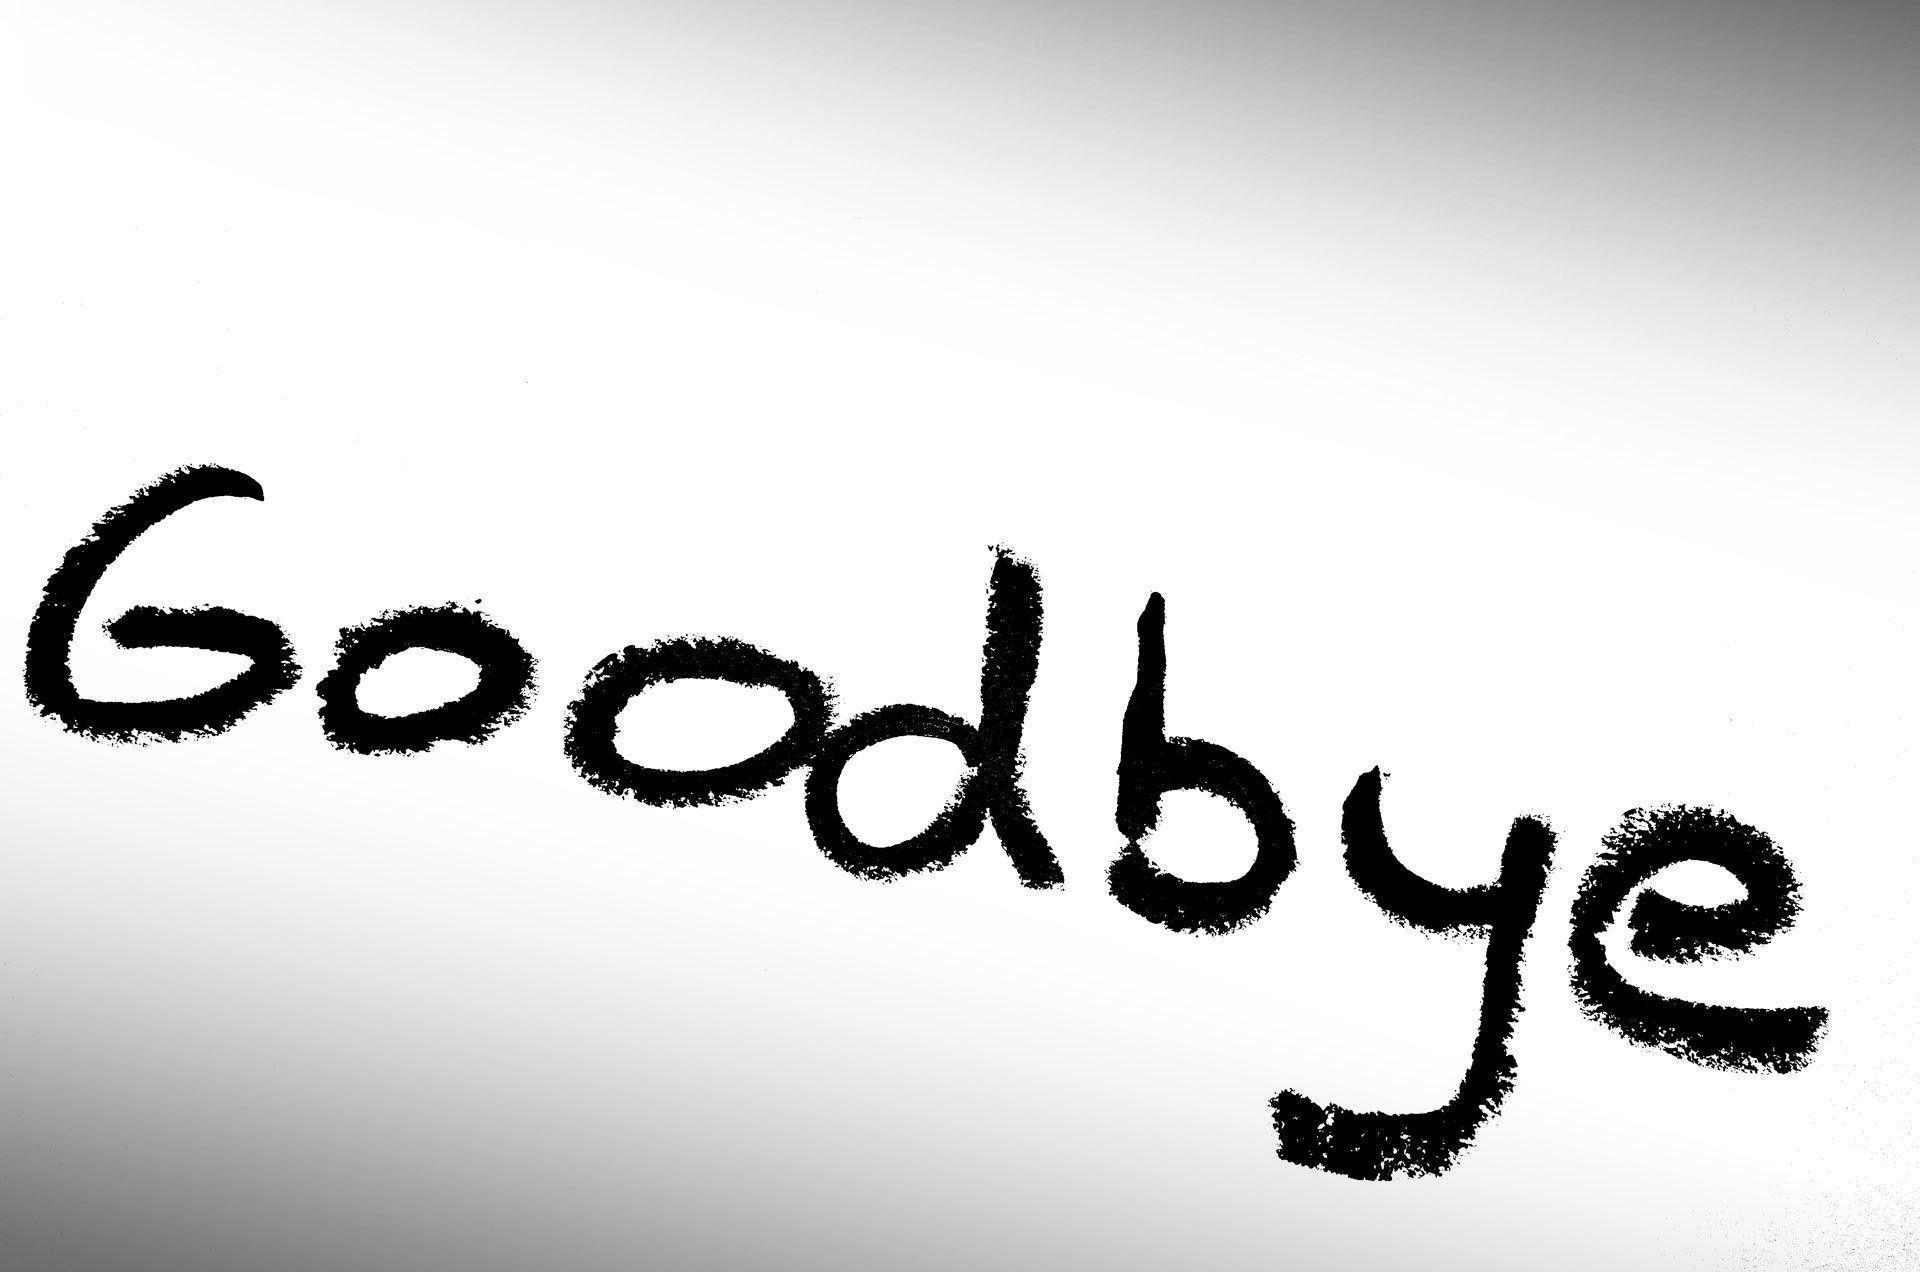 HD Wallpapers Of Good Bye - Wallpaper Cave